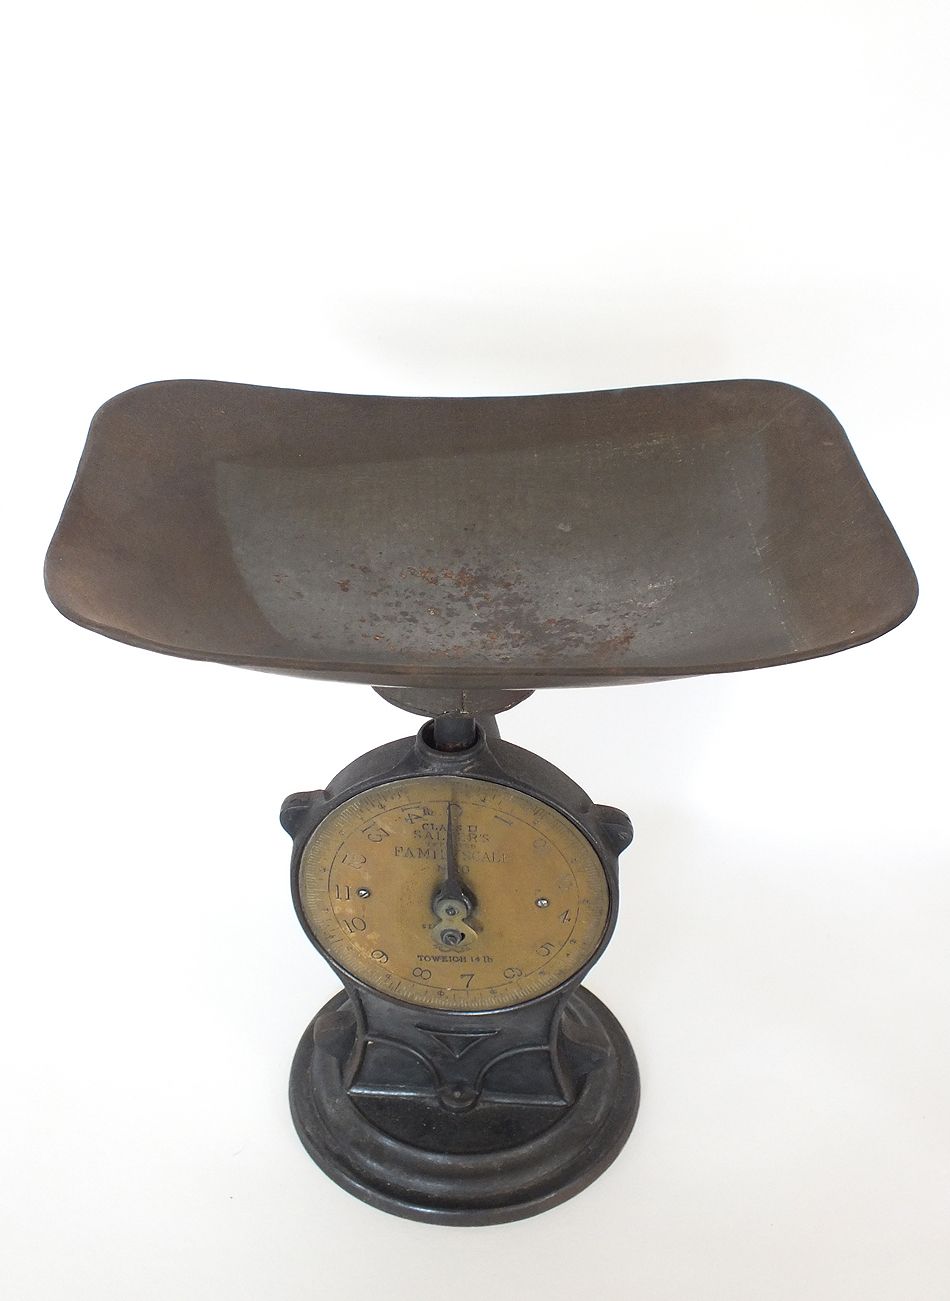 Salters Family Kitchen Weighing Scales, Cast Iron & Brass. Circa 1930s